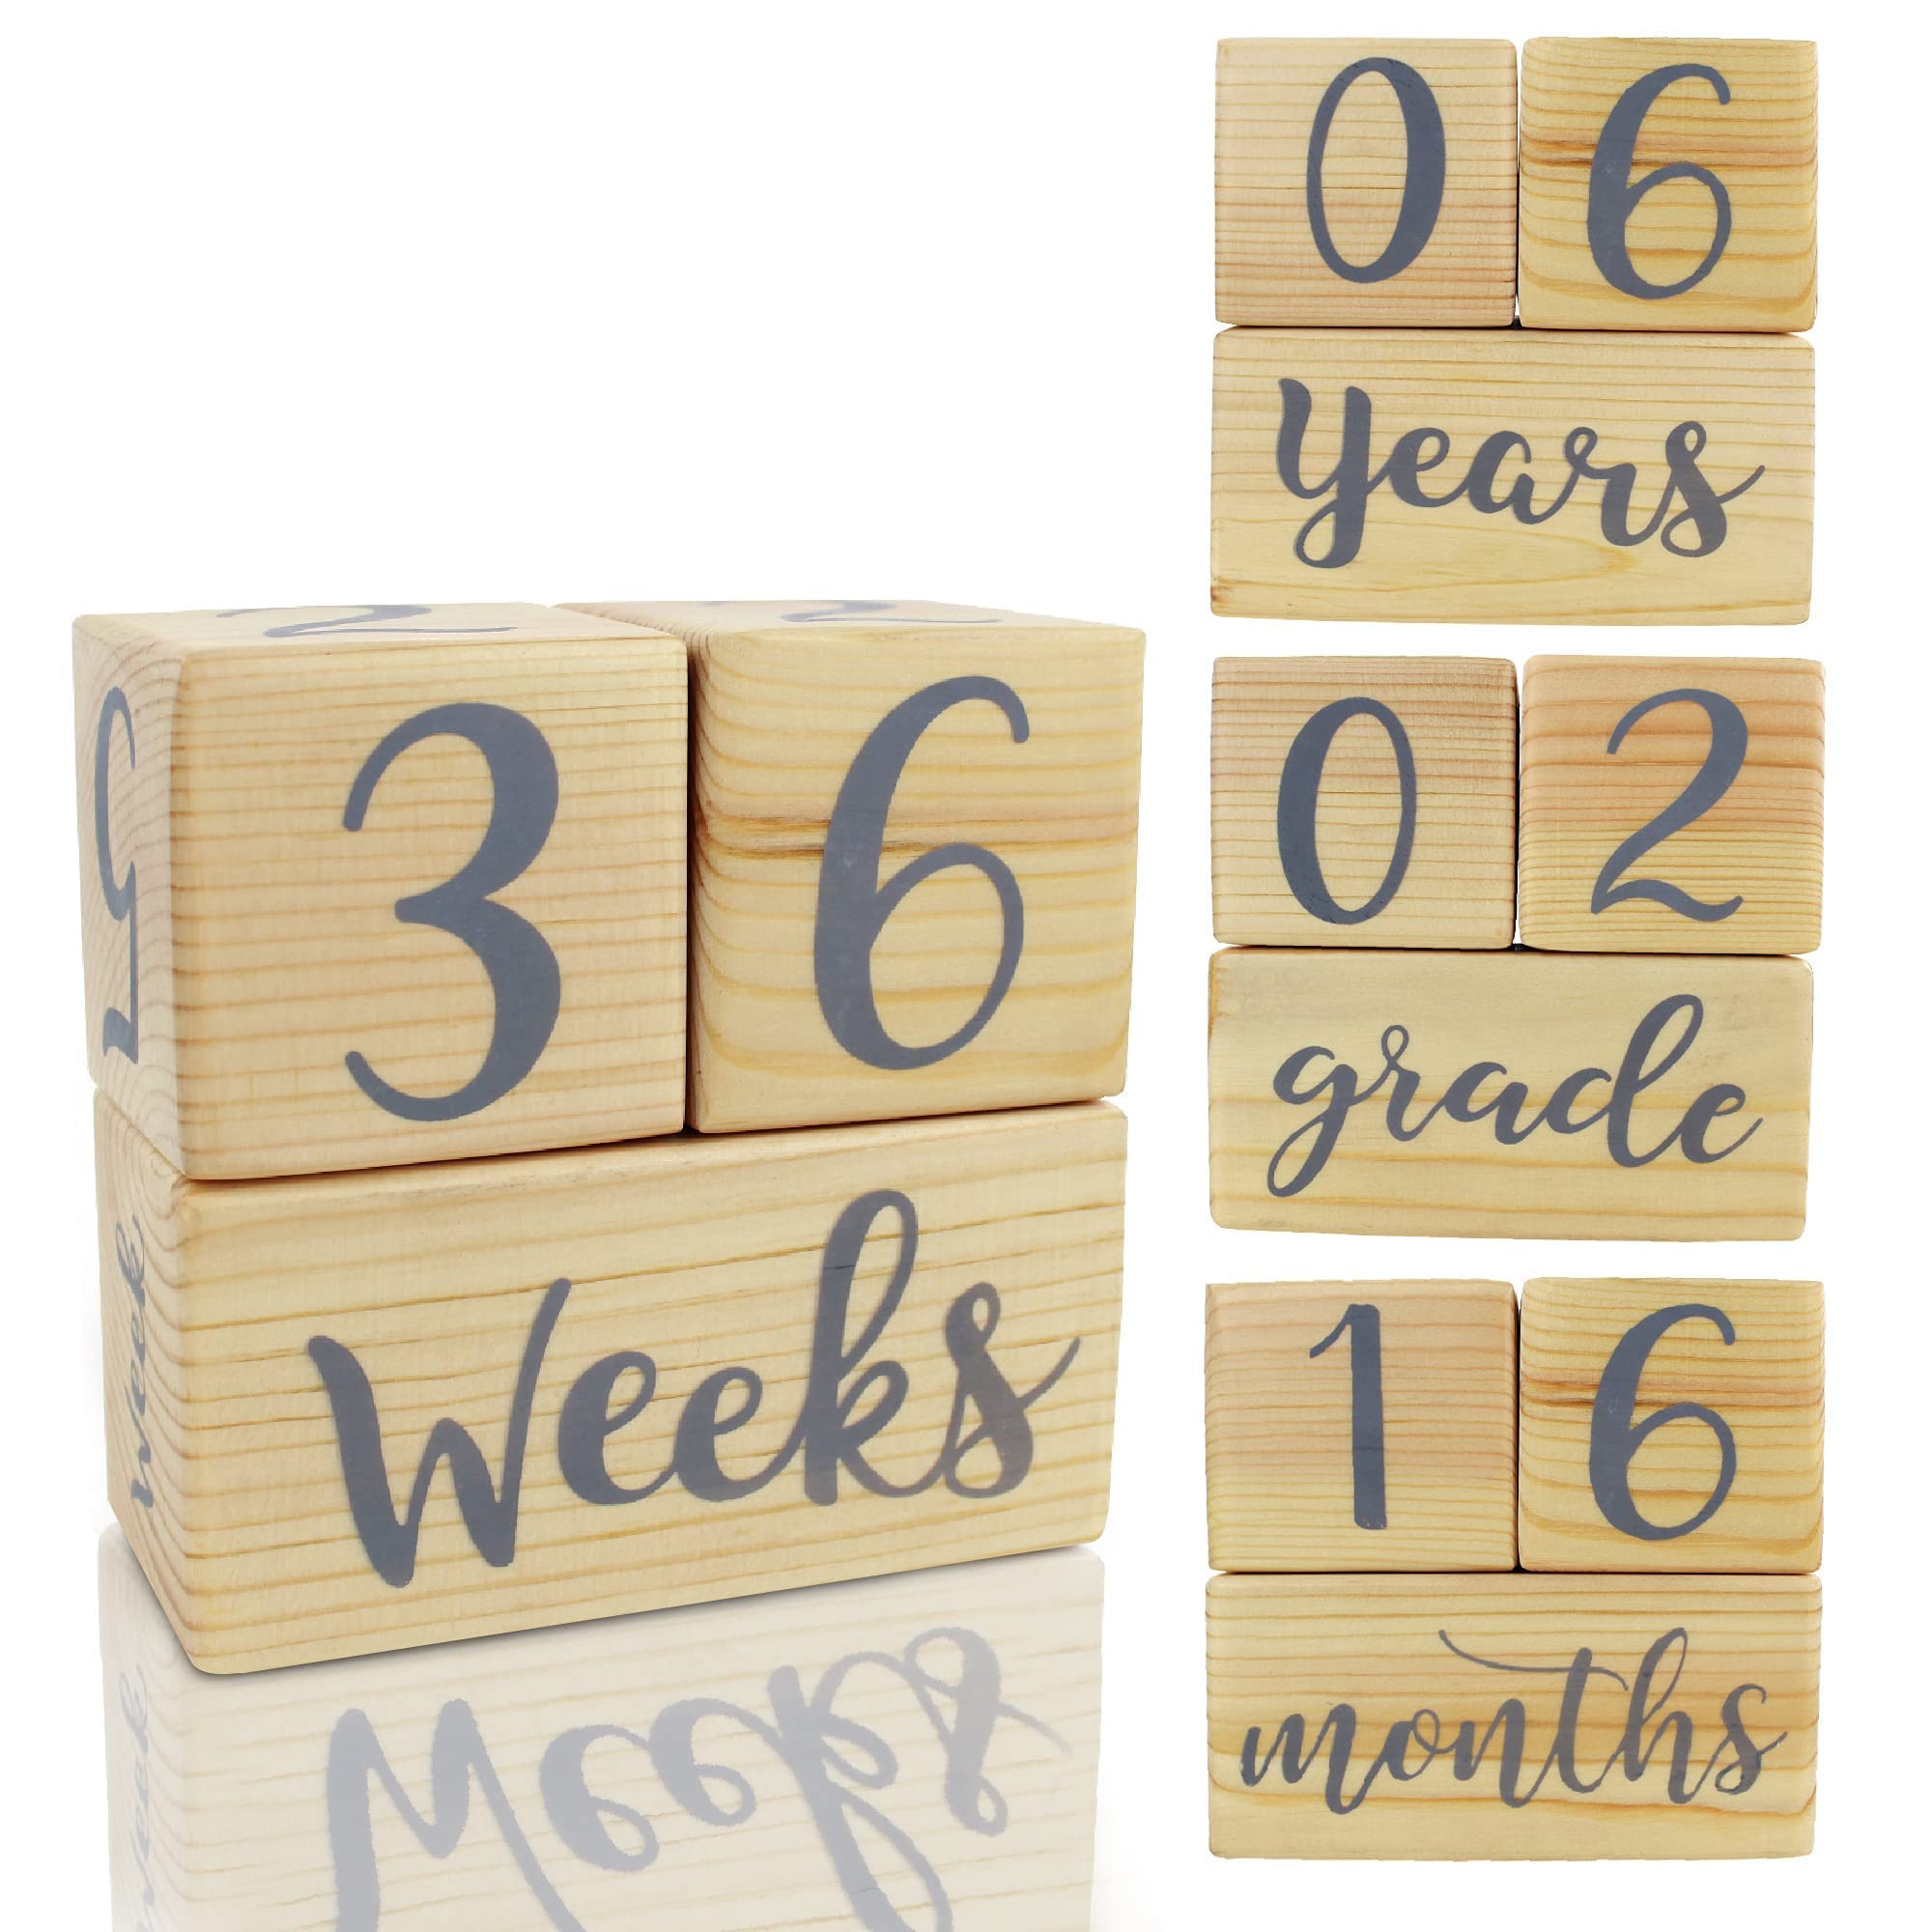 Baby Milestone Blocks – Natural Wooden Baby Monthly Milestone Blocks with Weeks, Months & Years. The Milestone Blocks are an Ideal Gift for Photoshoots, Baby Shower, Pregnancy Gifts & New Mom's Gift